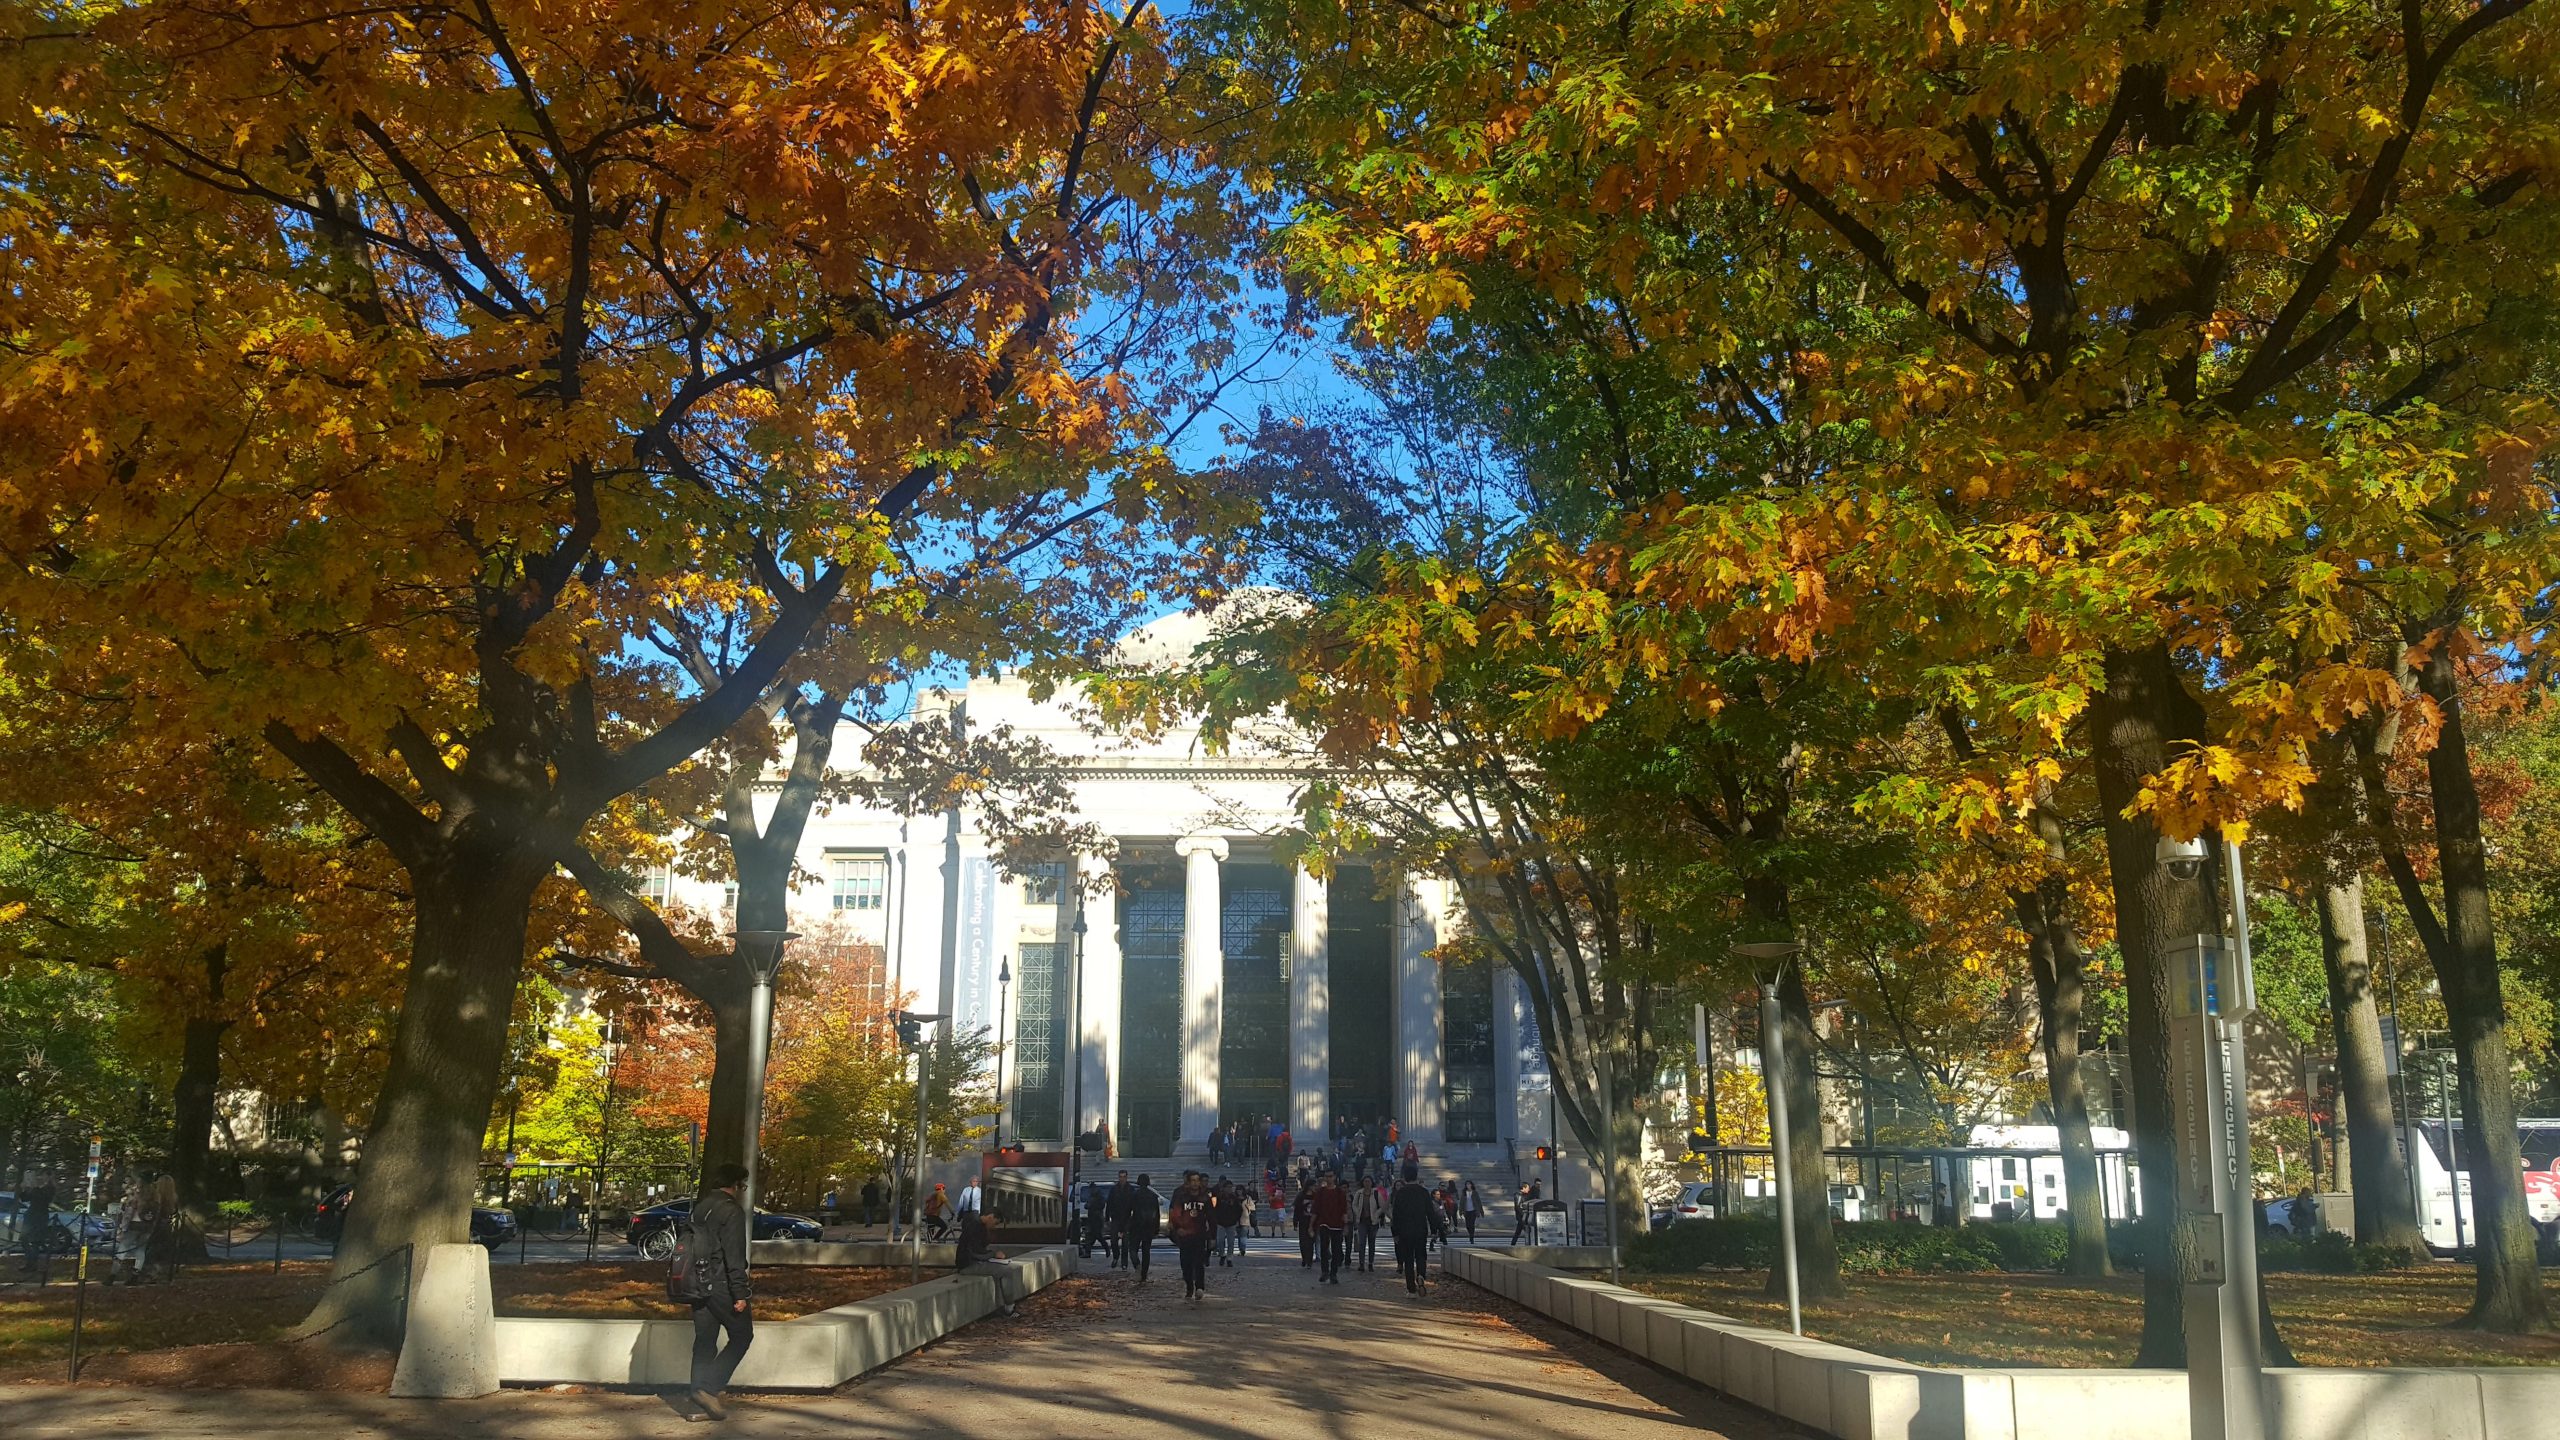 MIT campus, students and trees